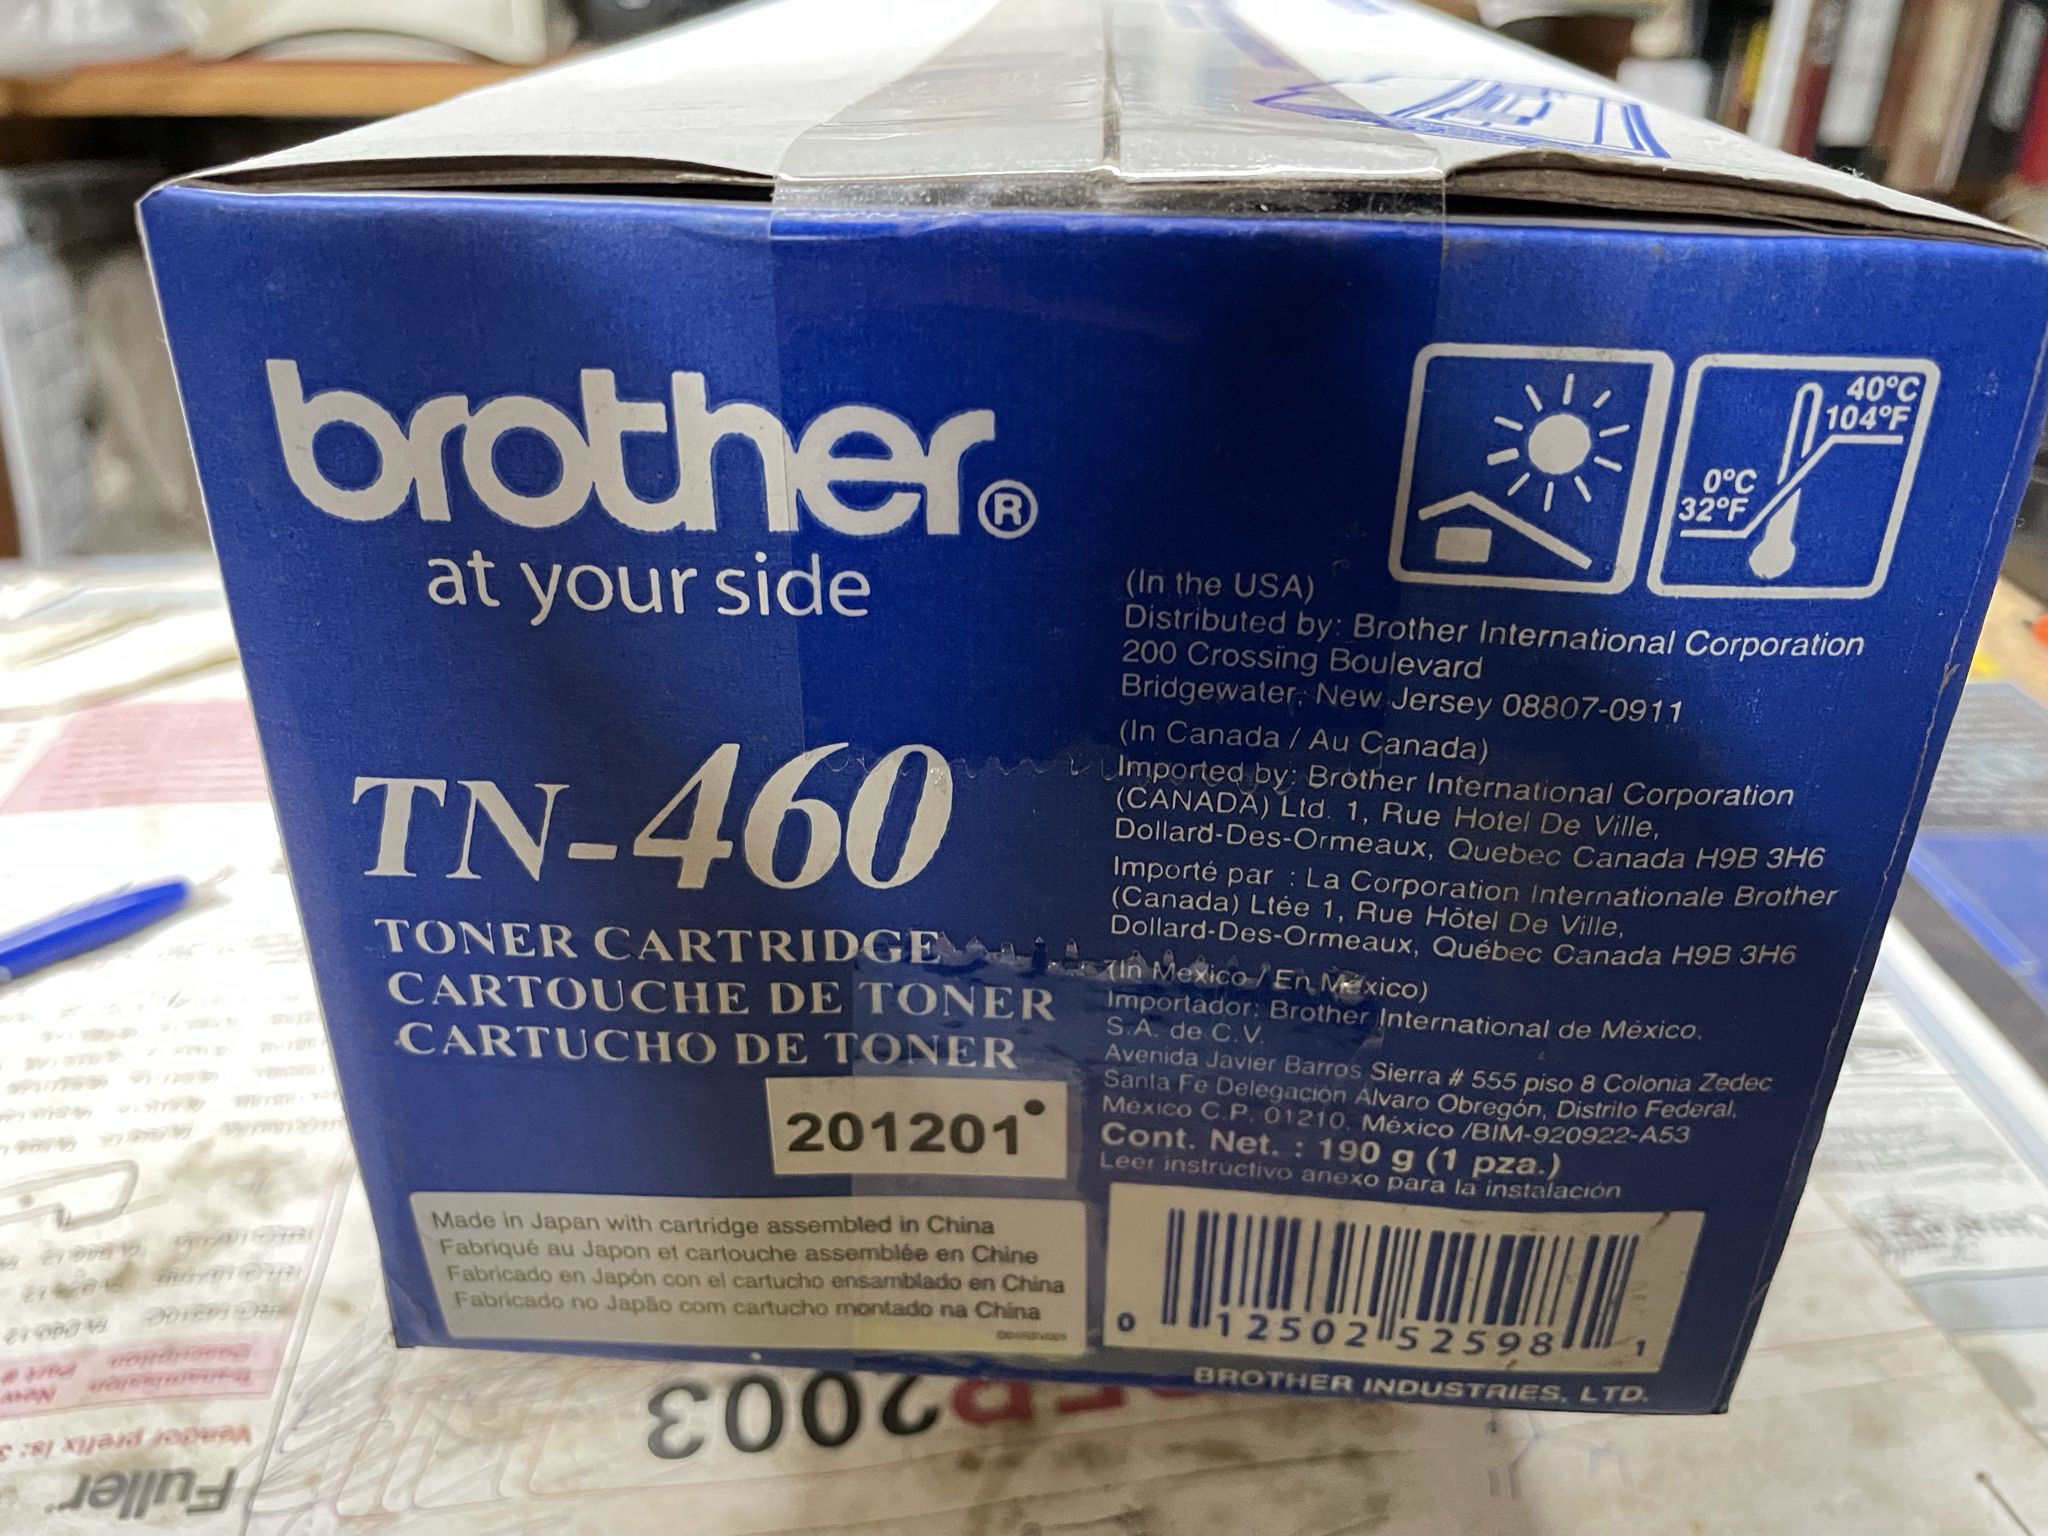 New Inks For Printer  TN-460  For Brother Printer